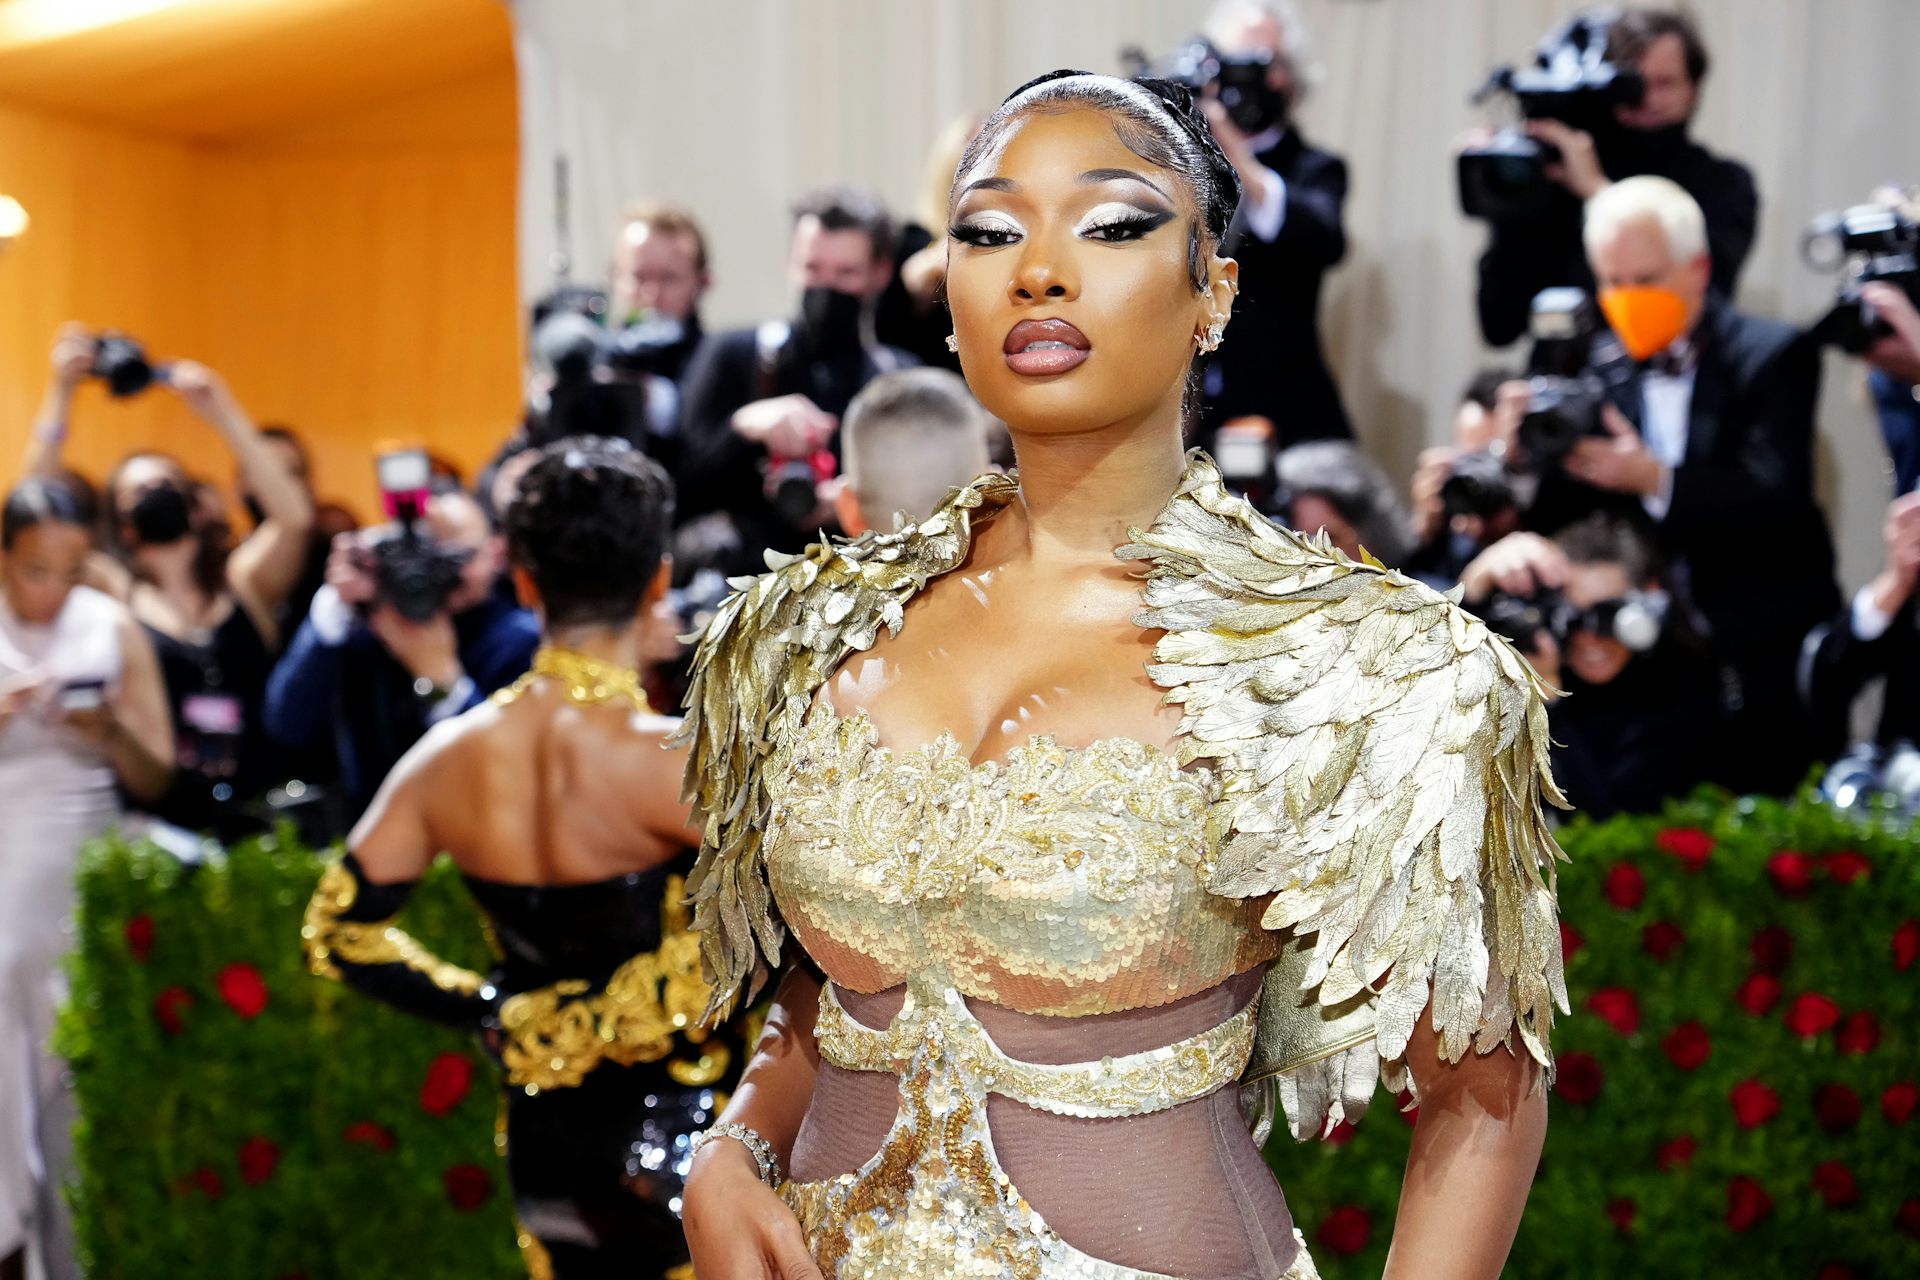 A Black woman dressed in a fancy gold gown poses for photographers.